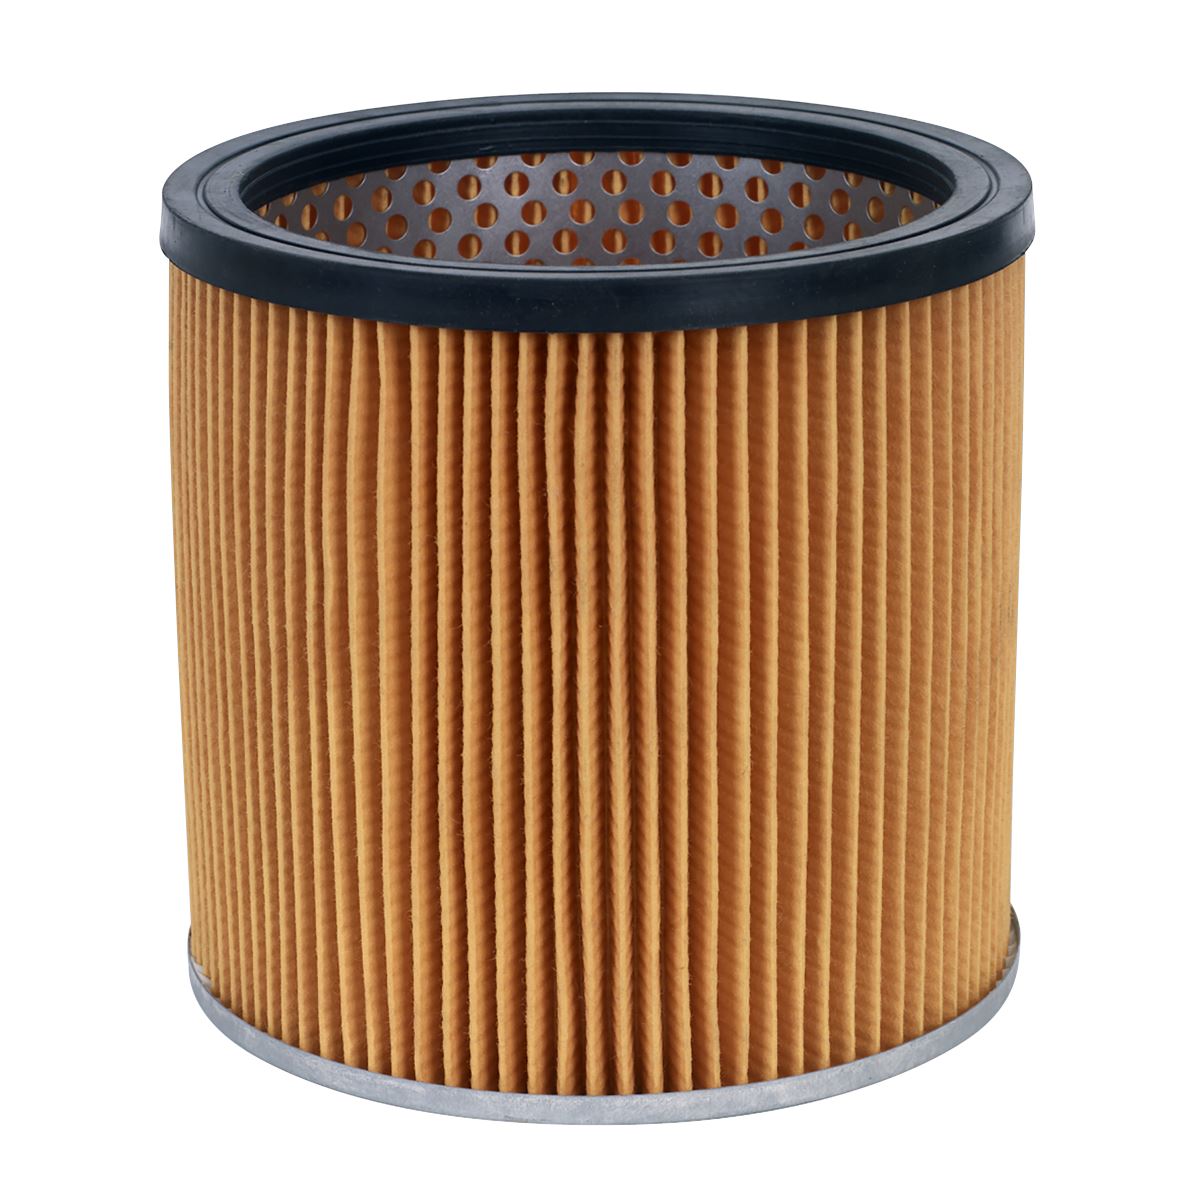 Sealey Reusable Cartridge Filter for PC477